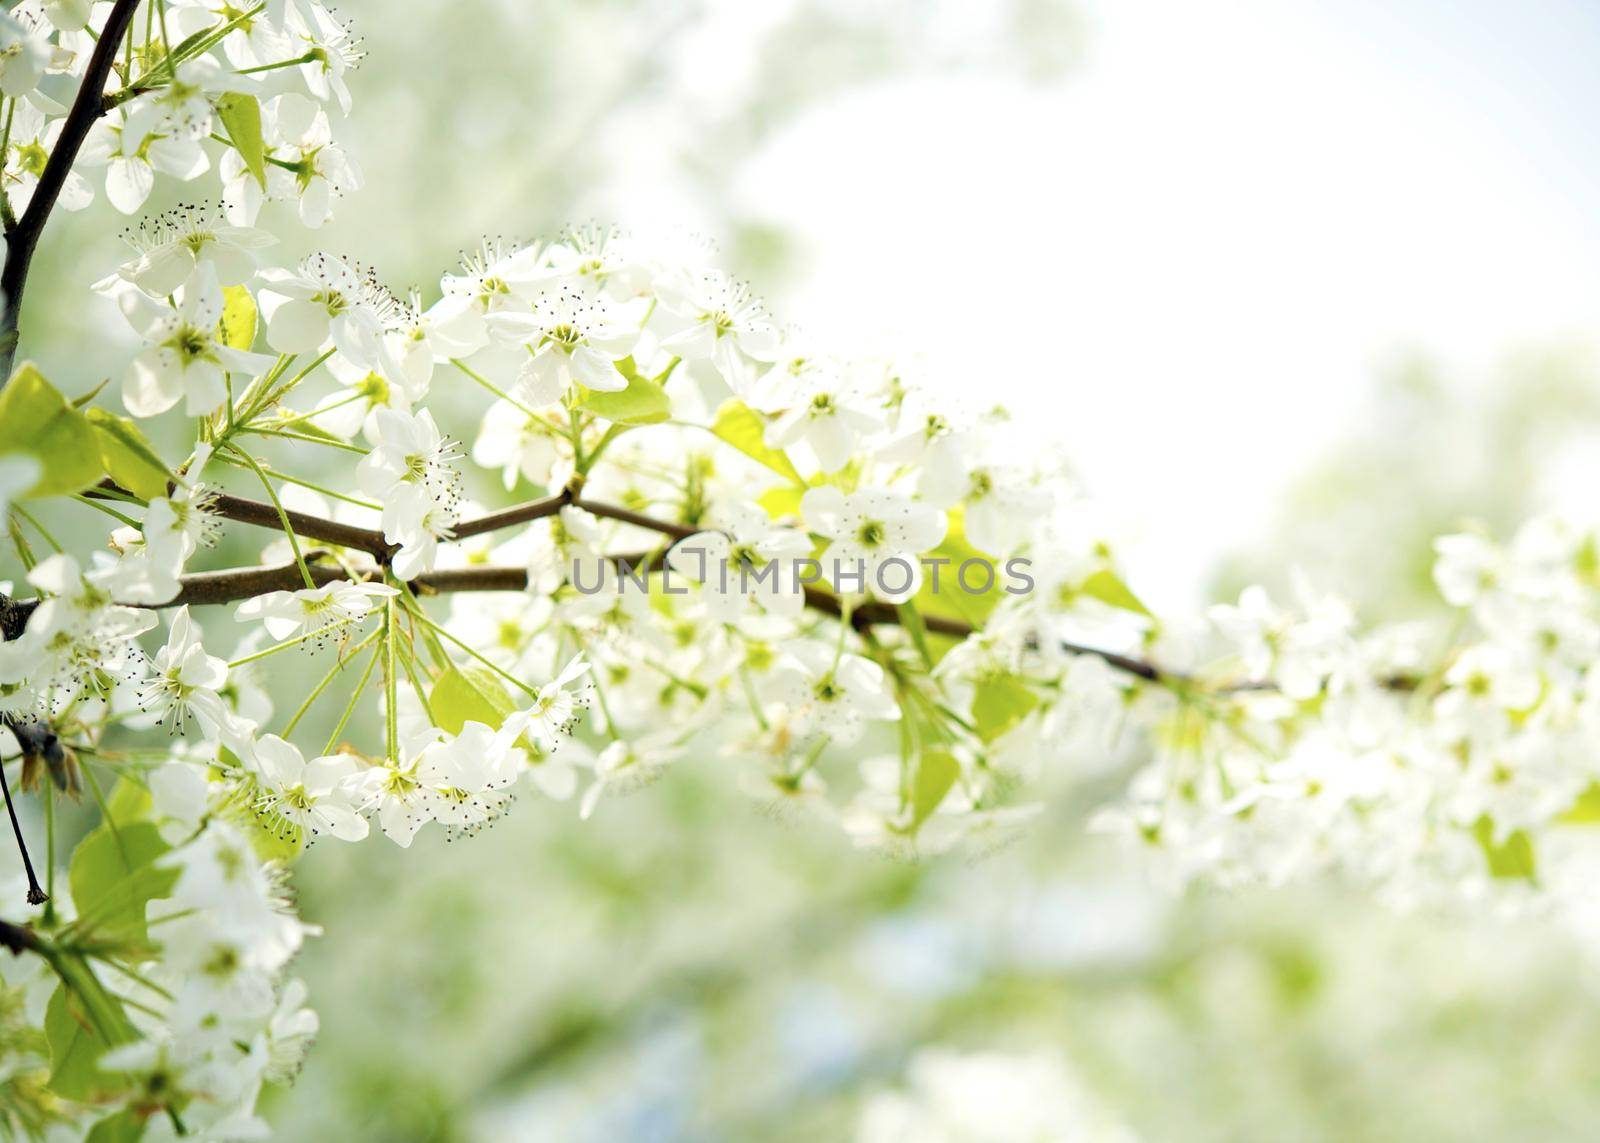 American Wild Plum - Flowering Branches. Nature Photo Collection. by welcomia